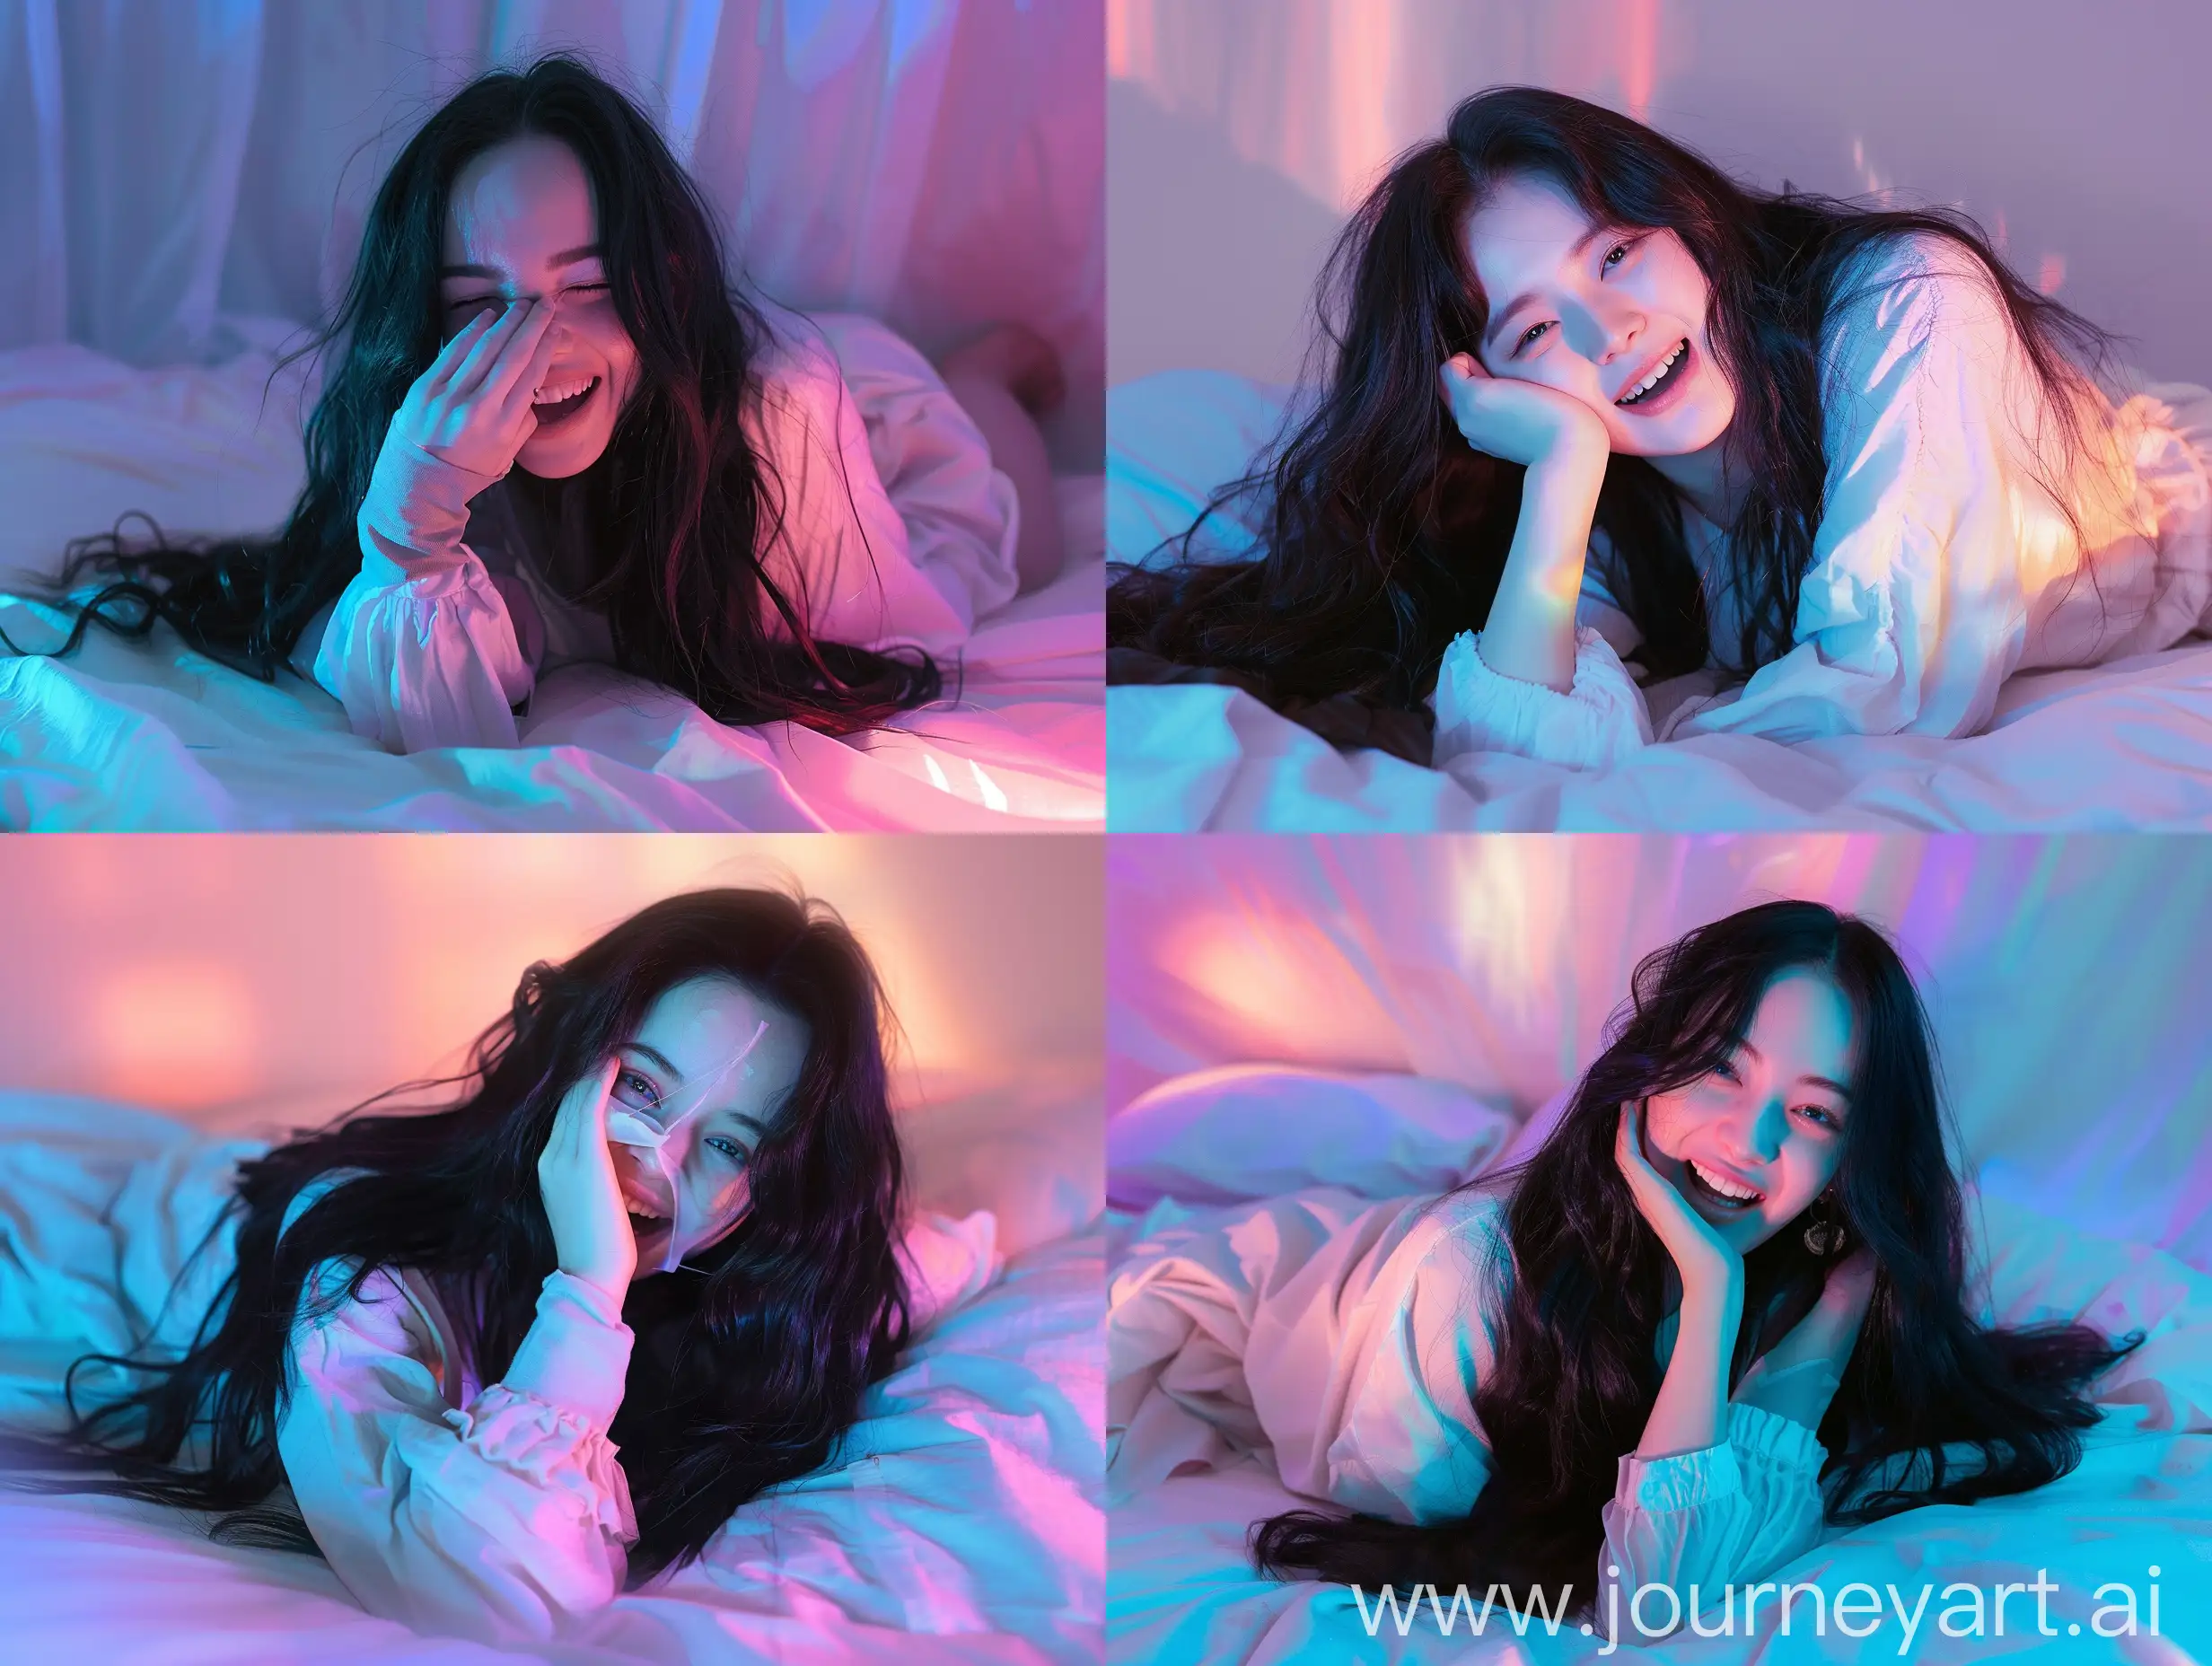 Laughing-Girl-with-Long-Black-Hair-on-Bed-in-Pastel-Lighting